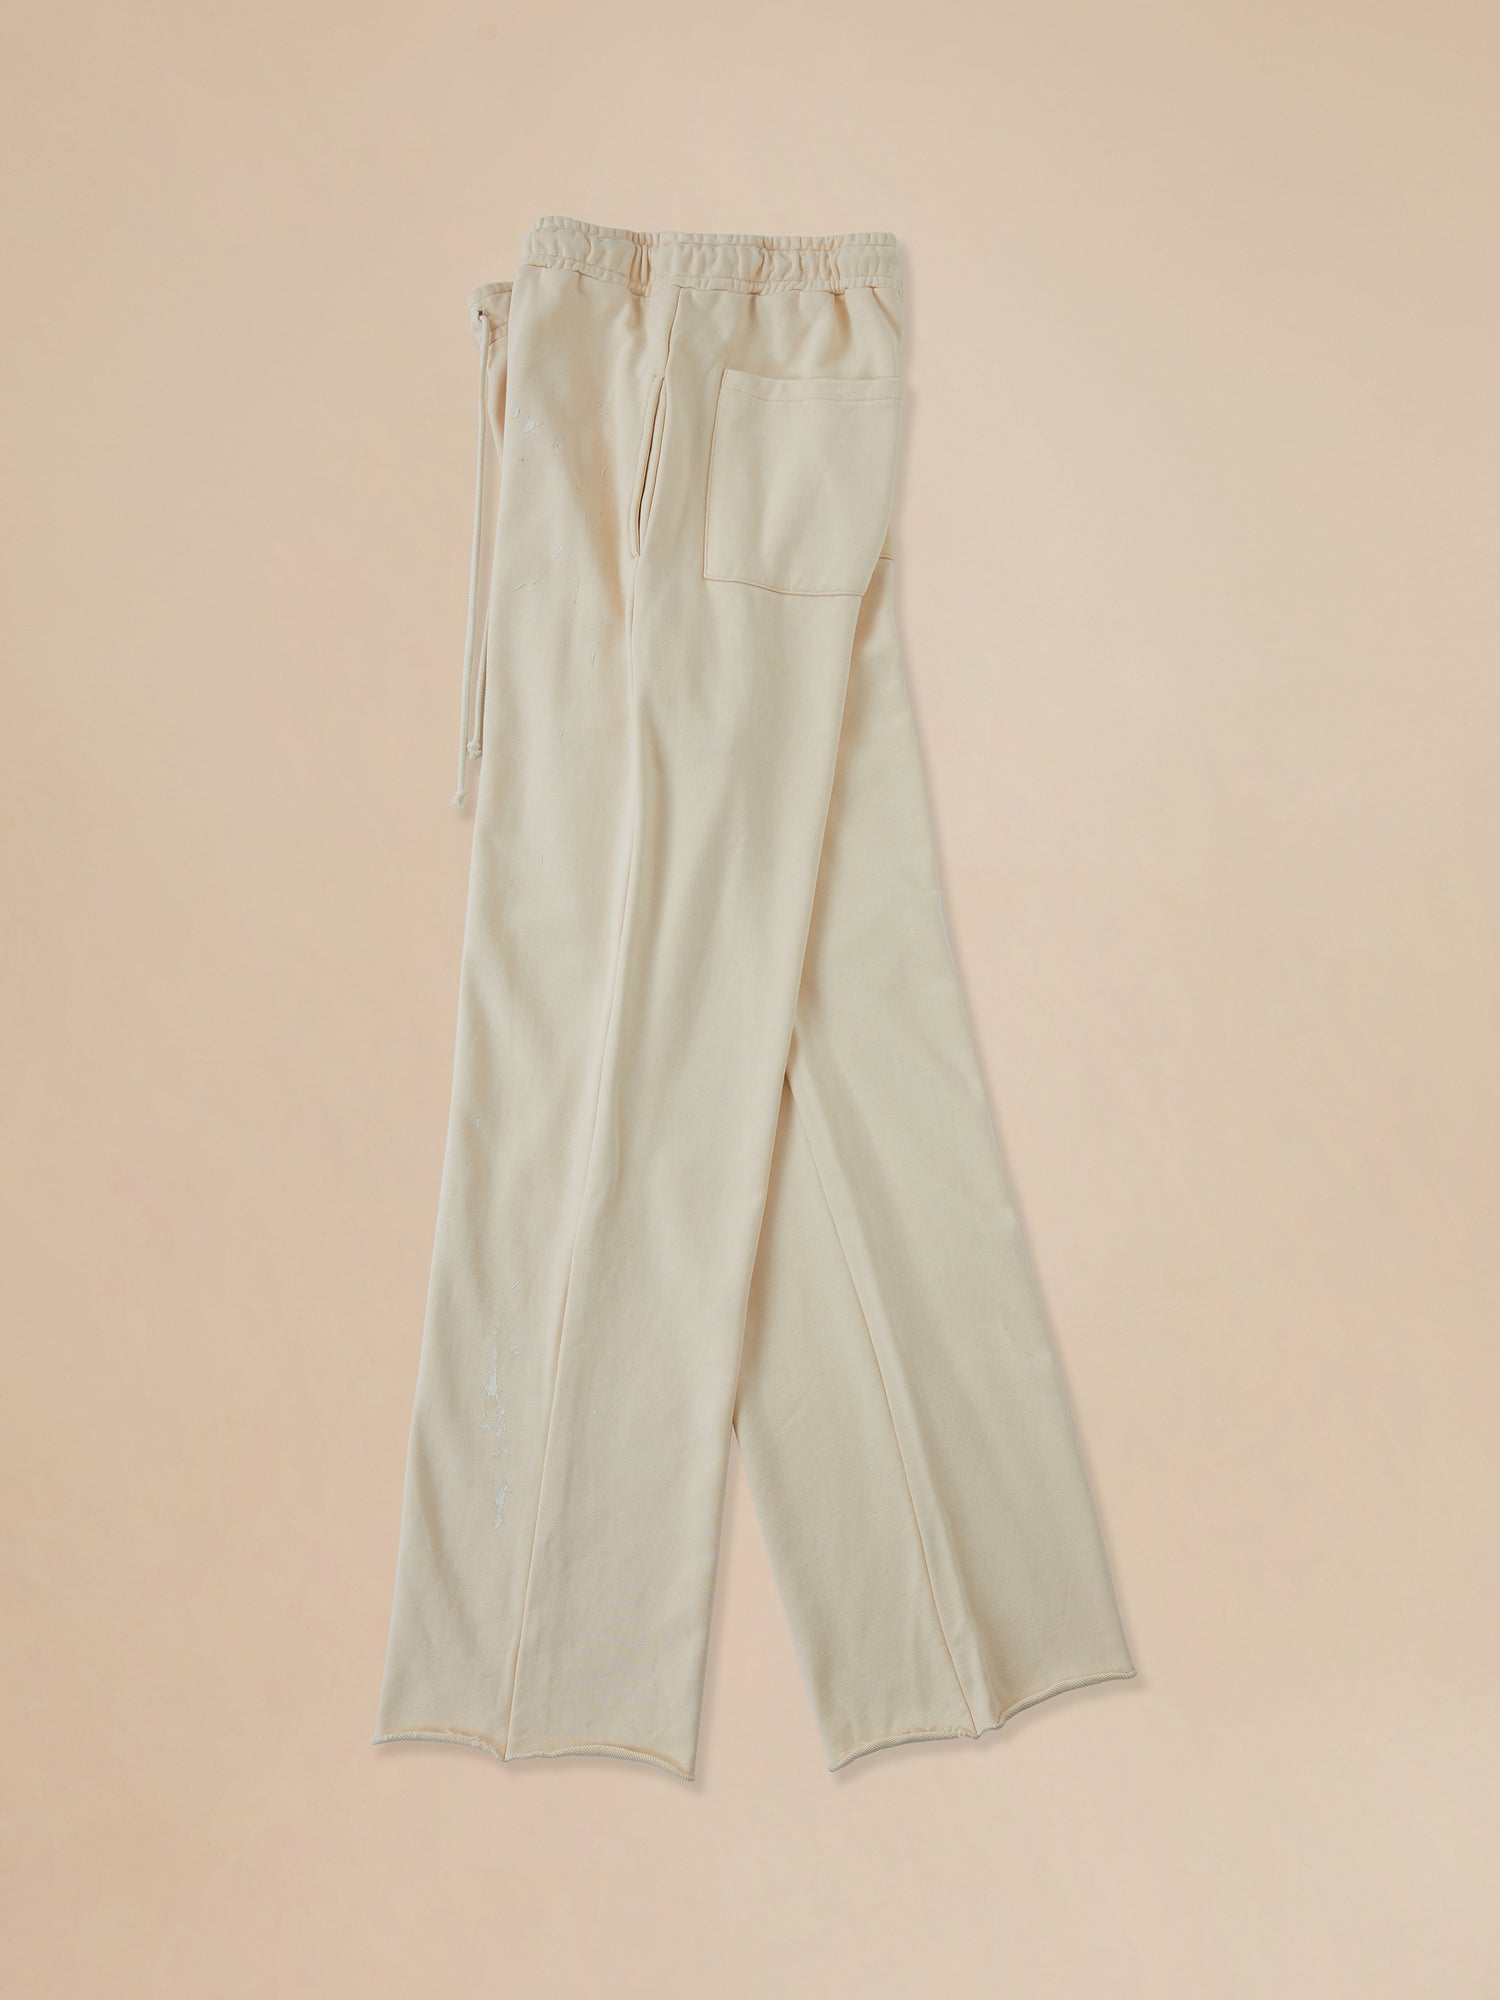 Found Sandshell Lounge Pants on a beige background with a worn-in look.